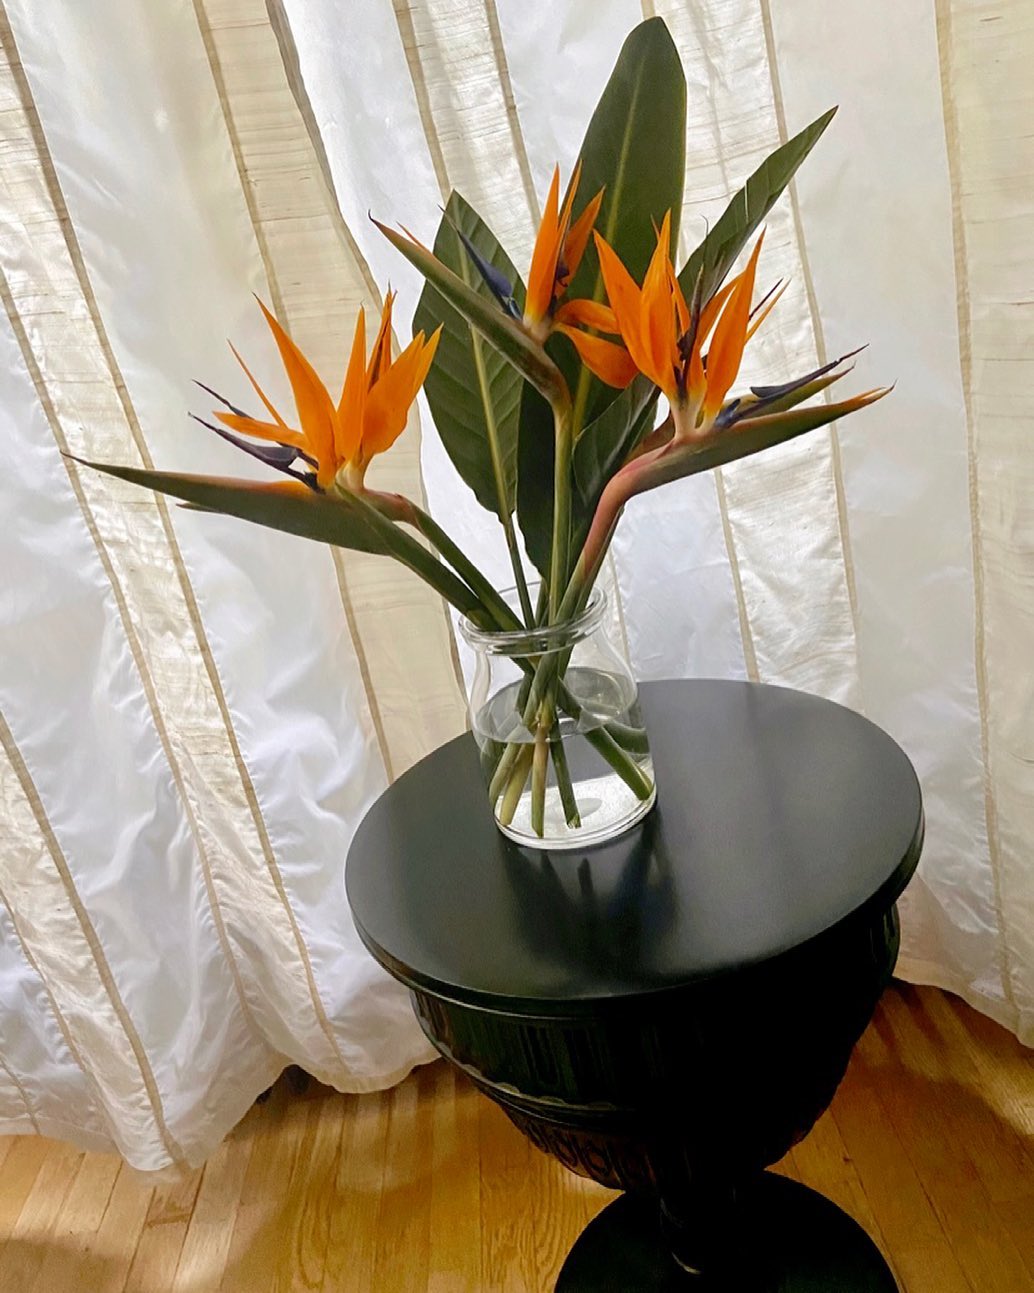 Mono Bouquet with Bird of Paradise Flowers